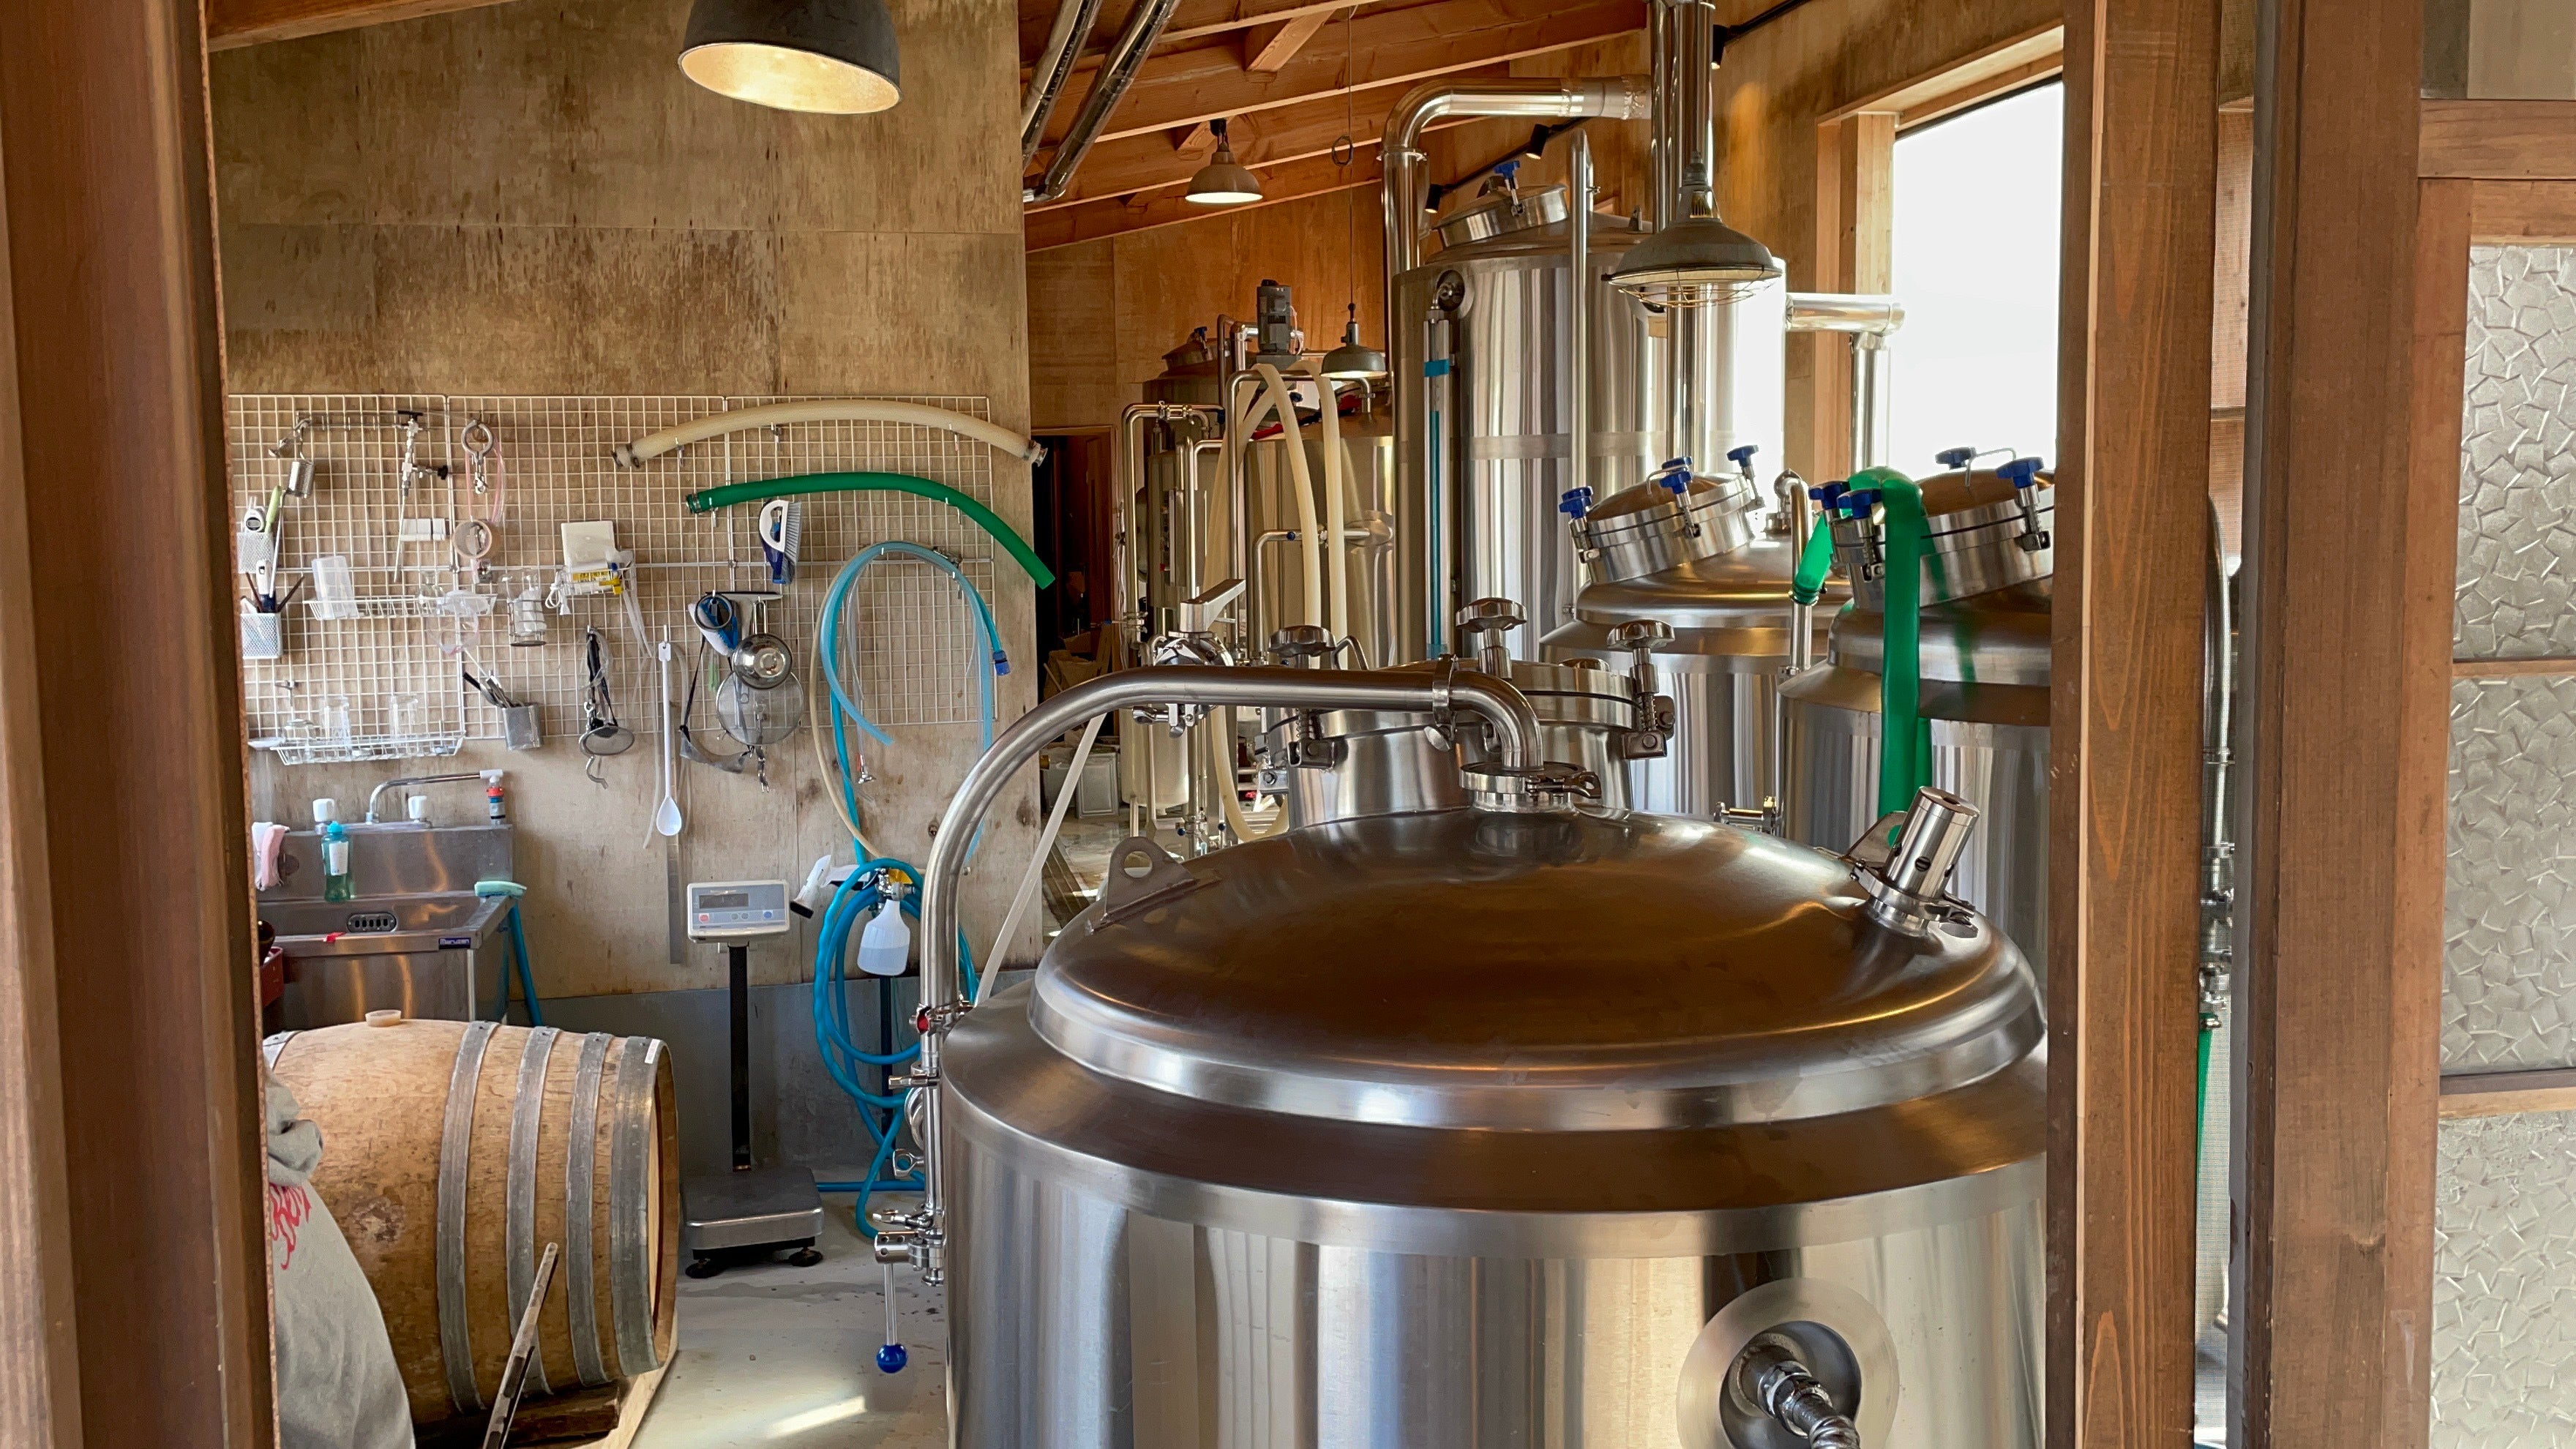 Rise & Win Brewing Company creates two types of zero-waste beer from discarded farm crops